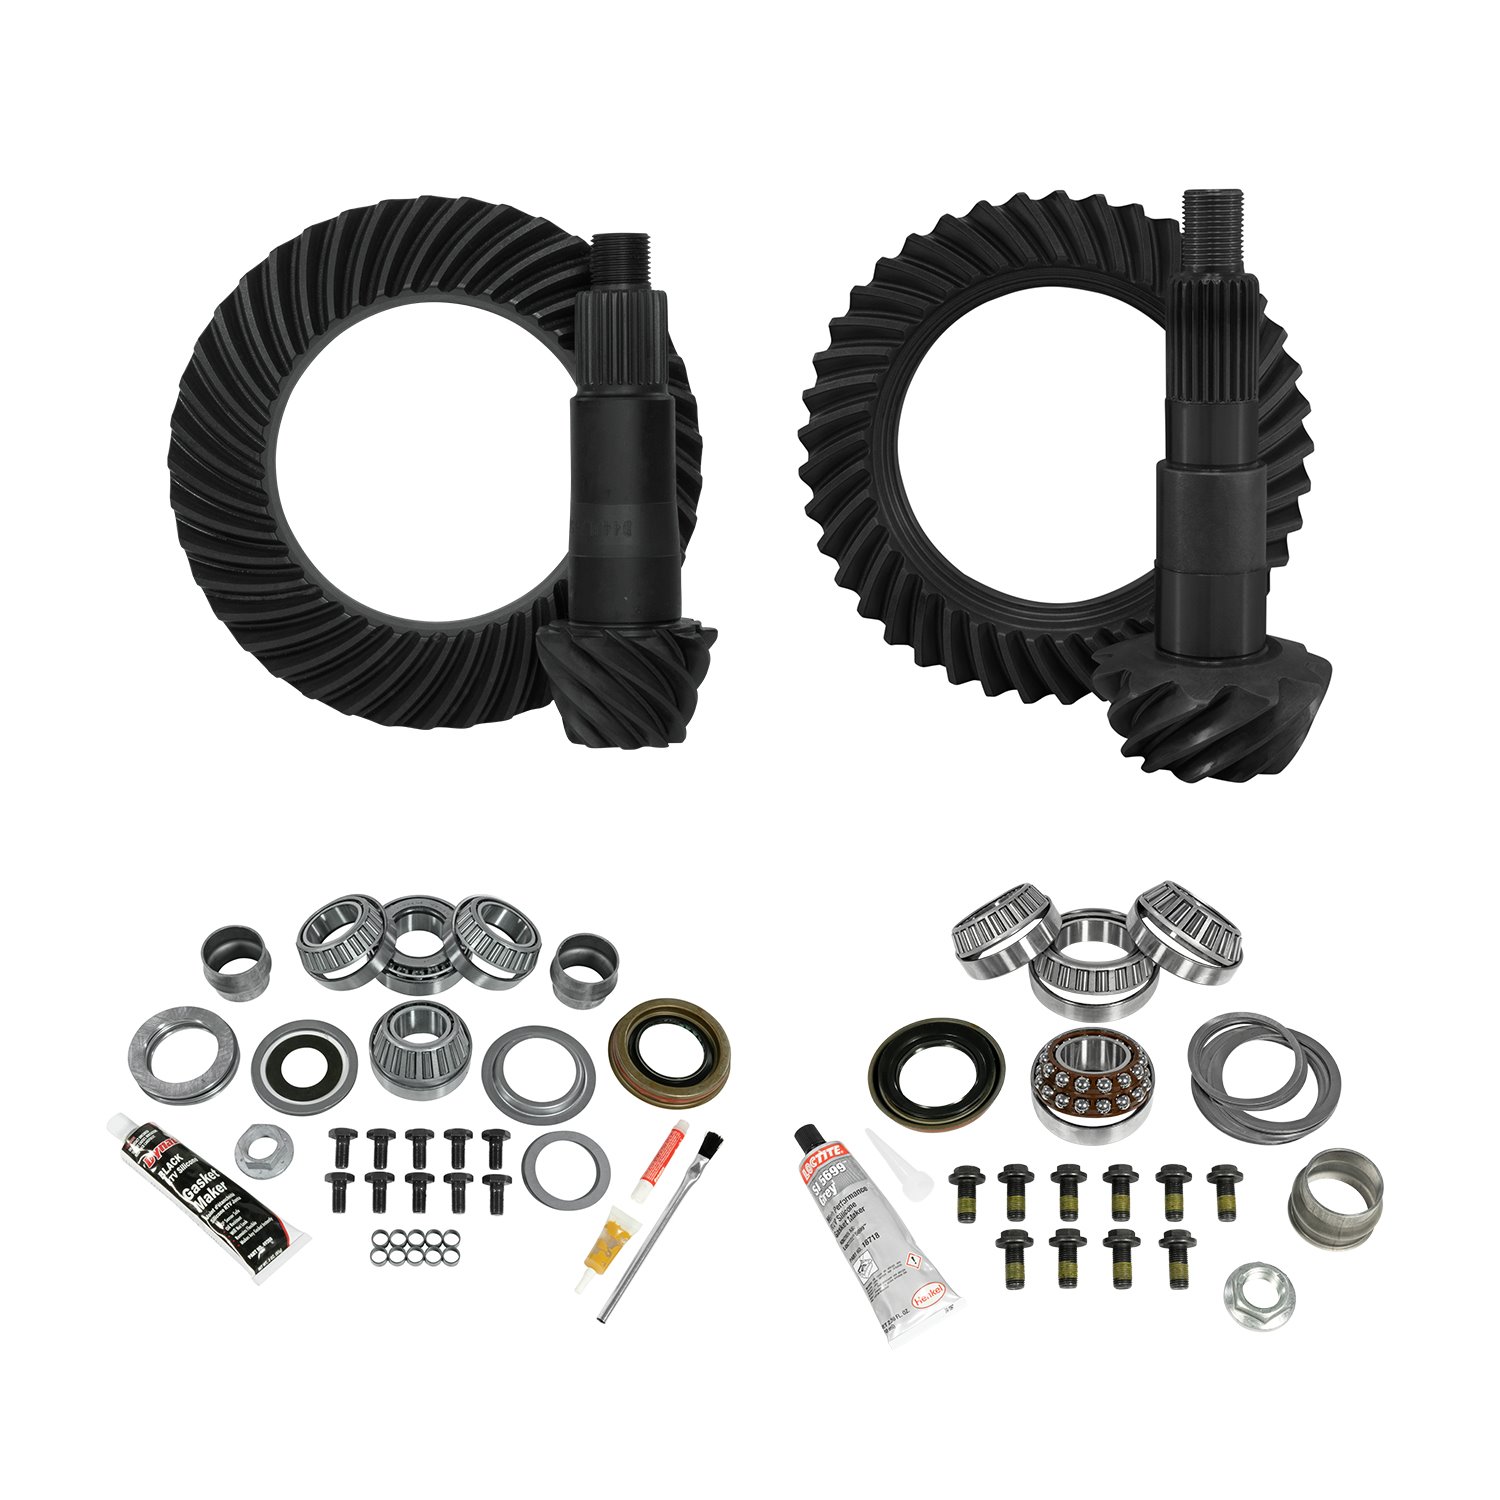 Re-Gear And Install Kit, D30 Front/D44 Rear, Jeep Jl Non-Rubicon, 3.73